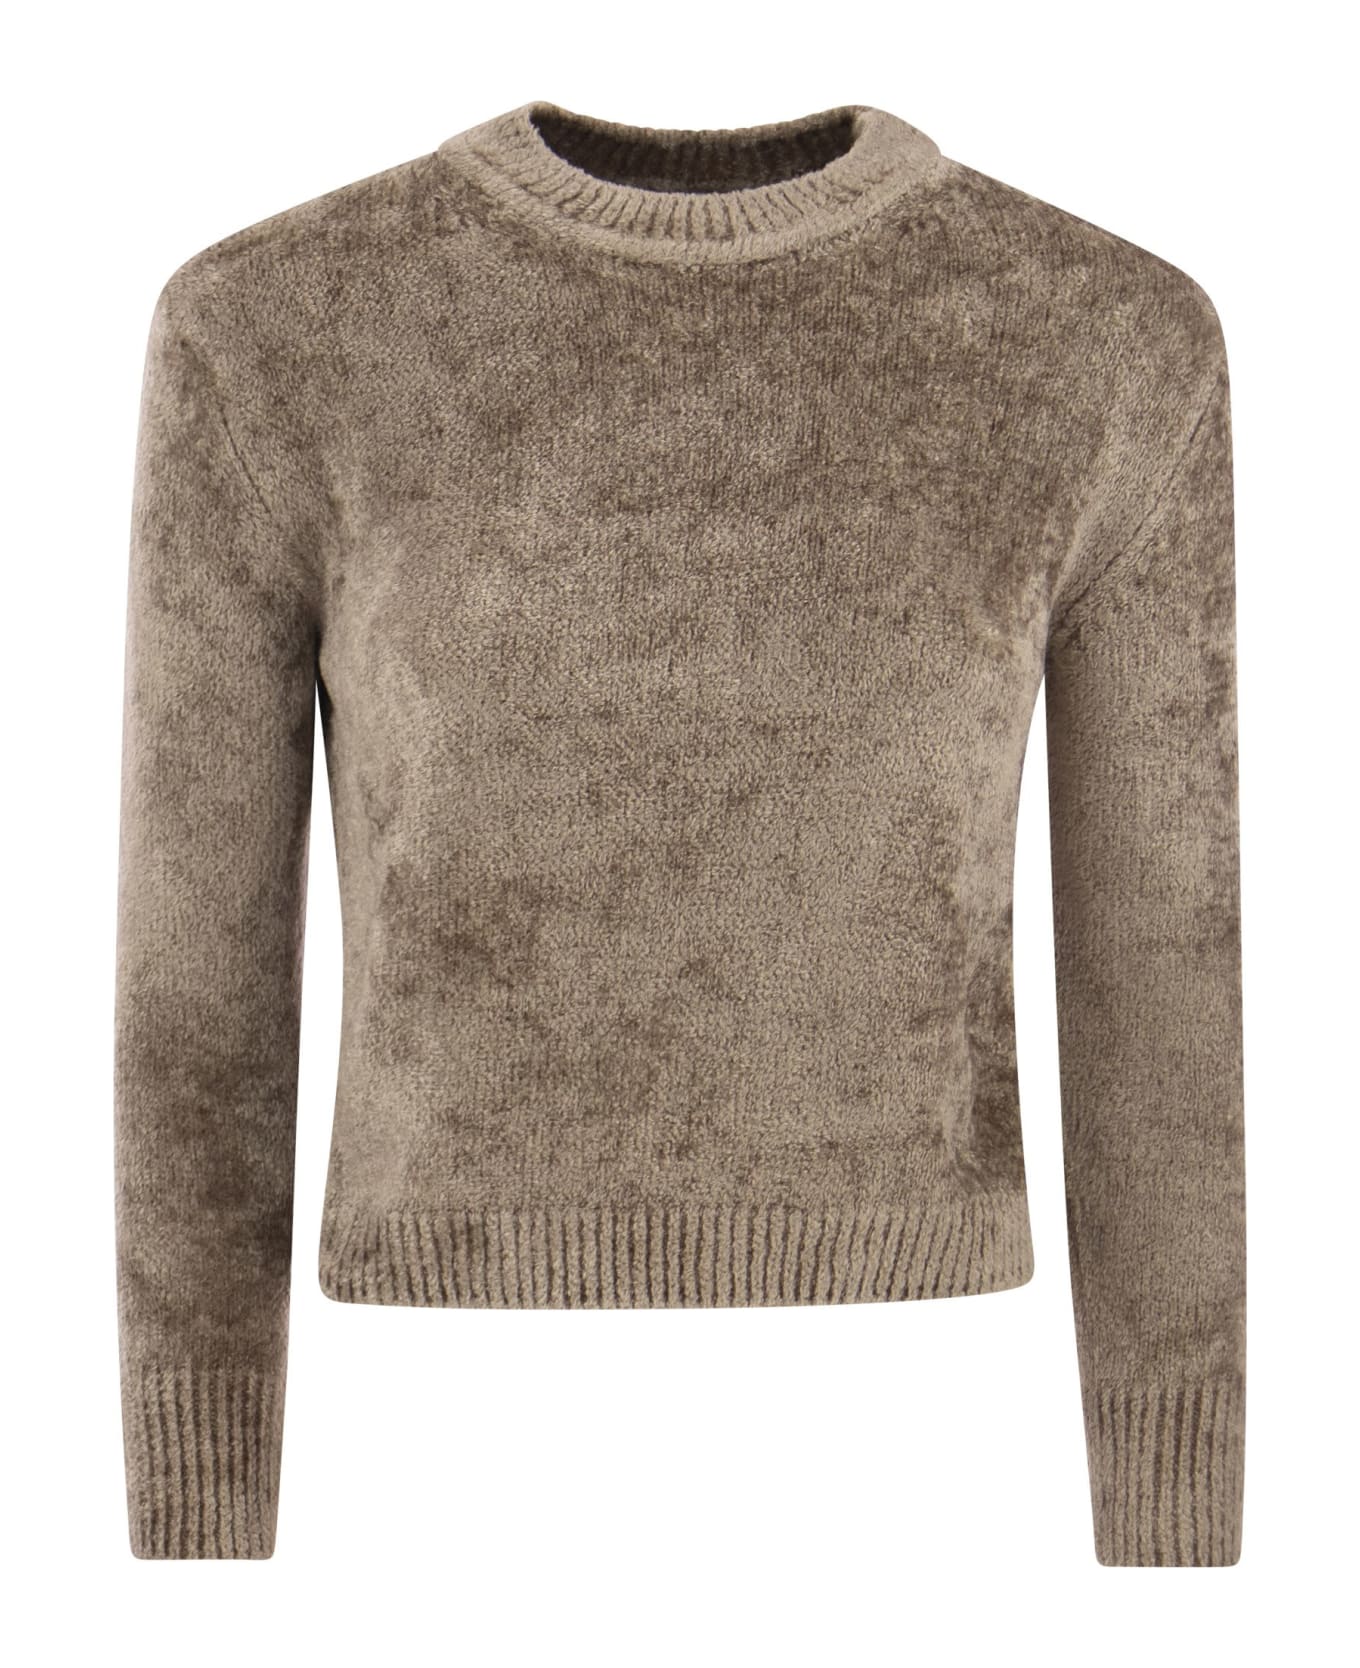 Herno Resort Pullover In Chenille Knit - Nude & Neutrals